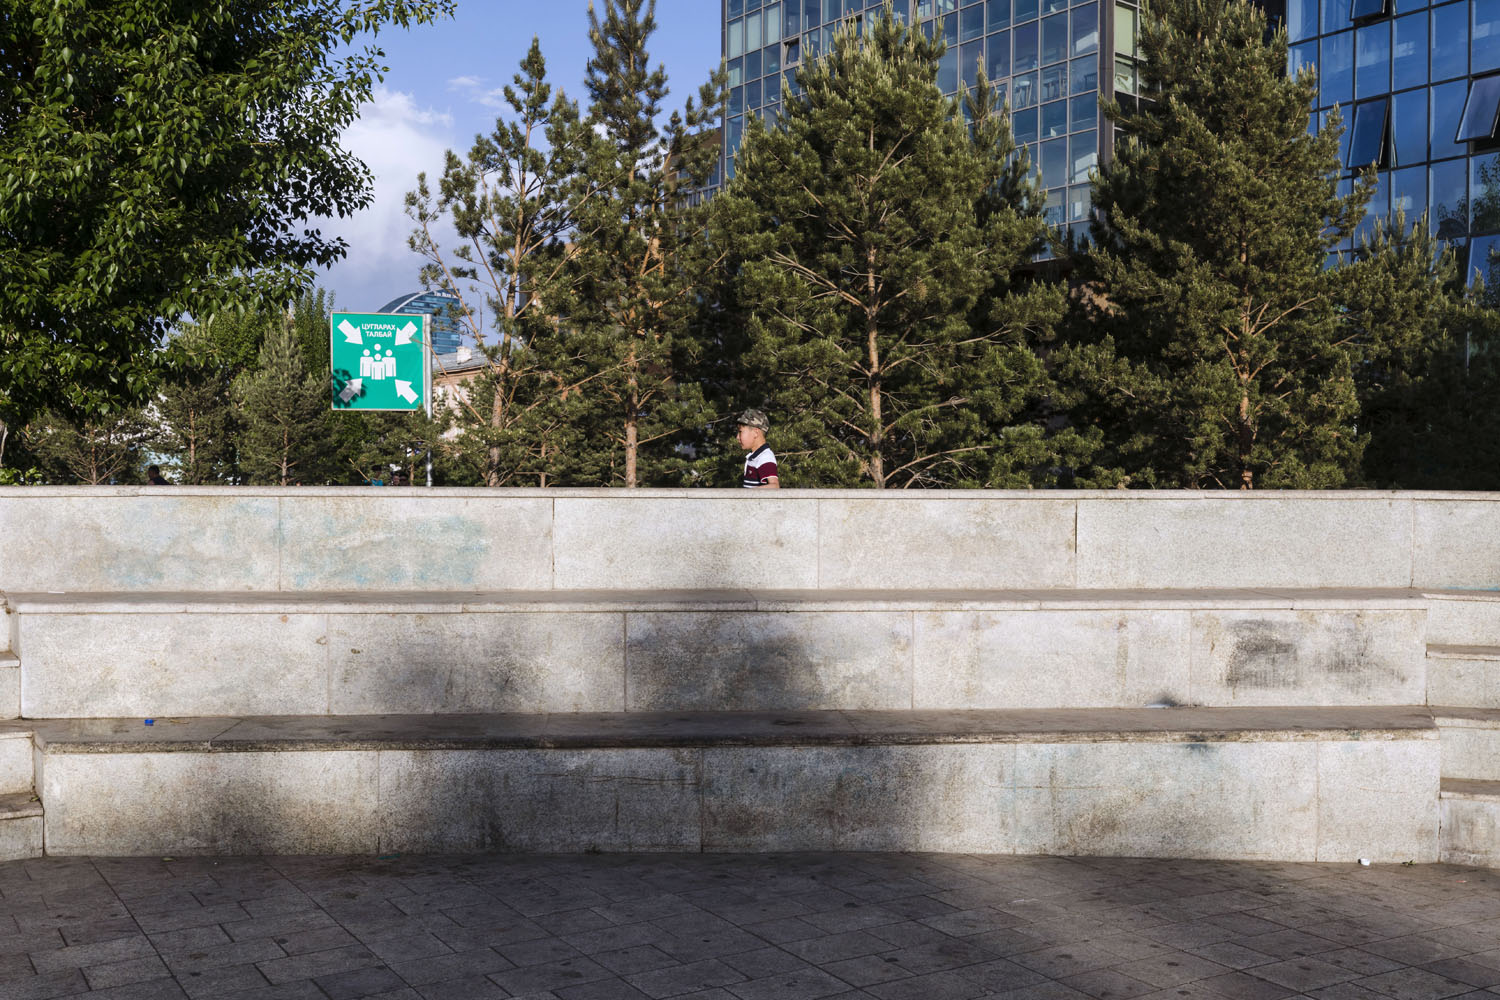 Child walks along the edge of a concrete structure in a park, in downtown Ulaanbaatar. Ulaanbaatar, Mongolia. 2018.